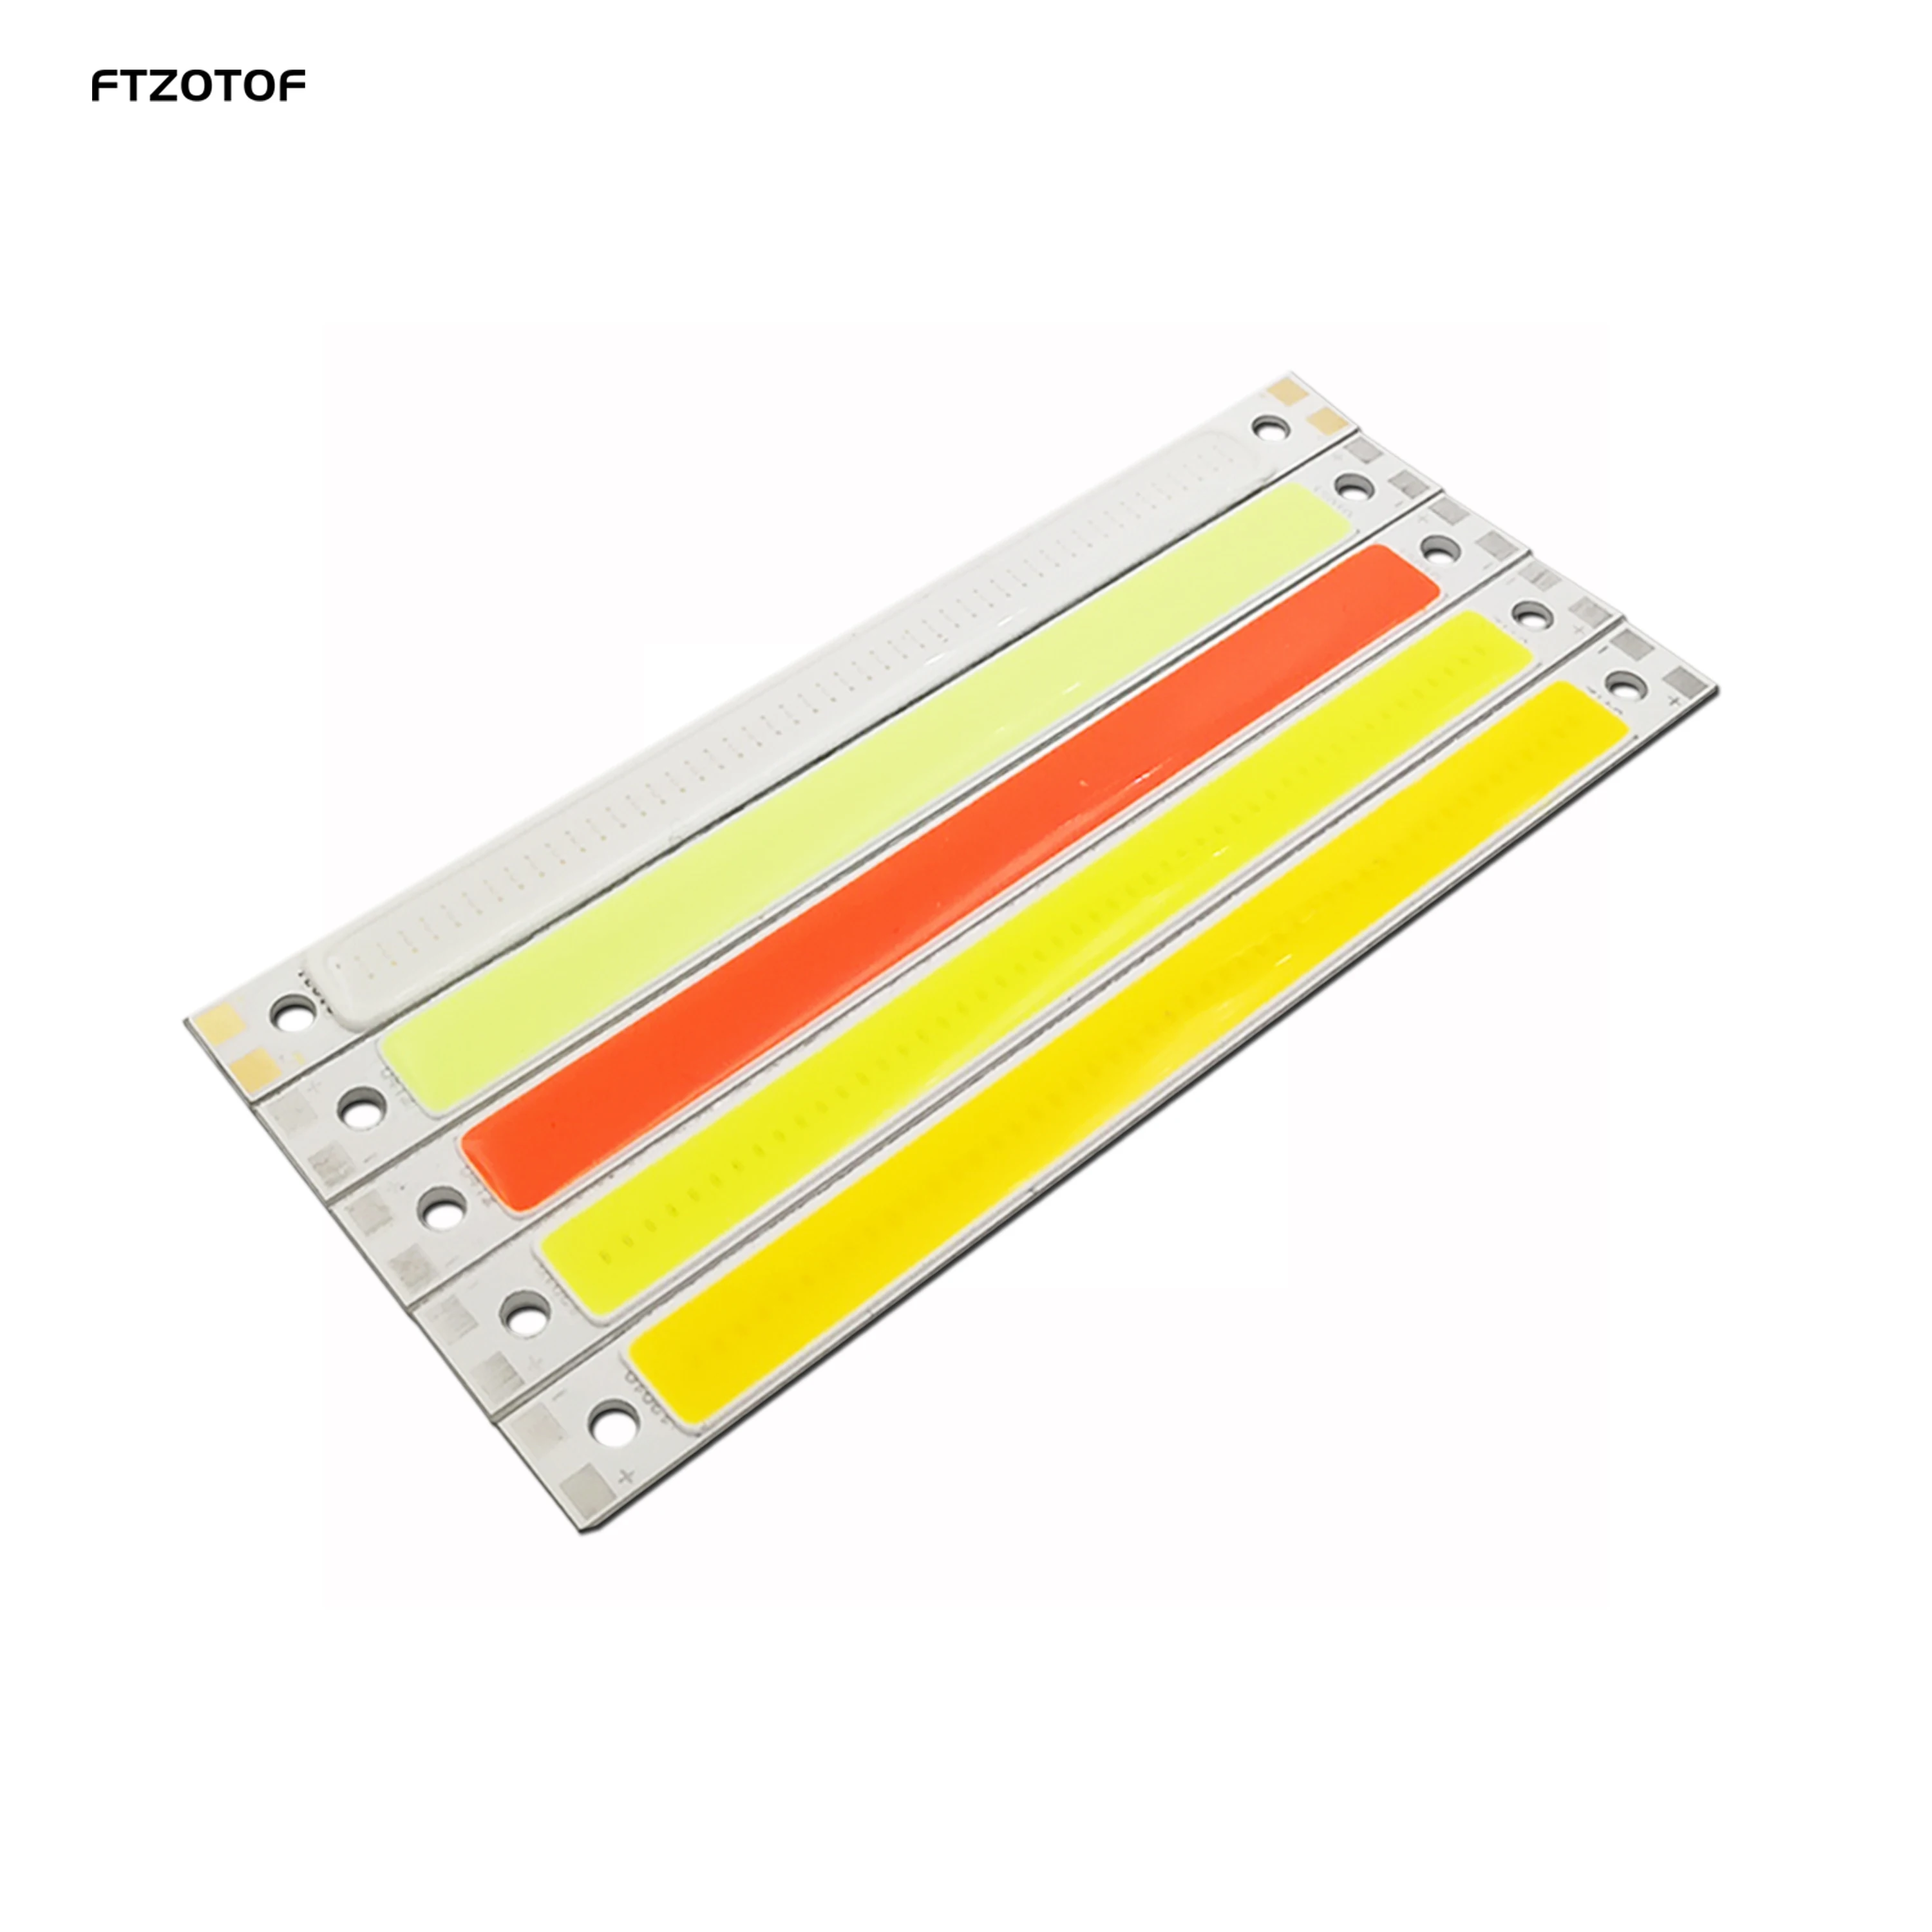 FTZOTOF 120x10mm 10W COB  LED Strip Bulbs DC 12v for Work Table Lamps DIY House Lighting Blue Red Warm Cold White 12CM  Bar Chip